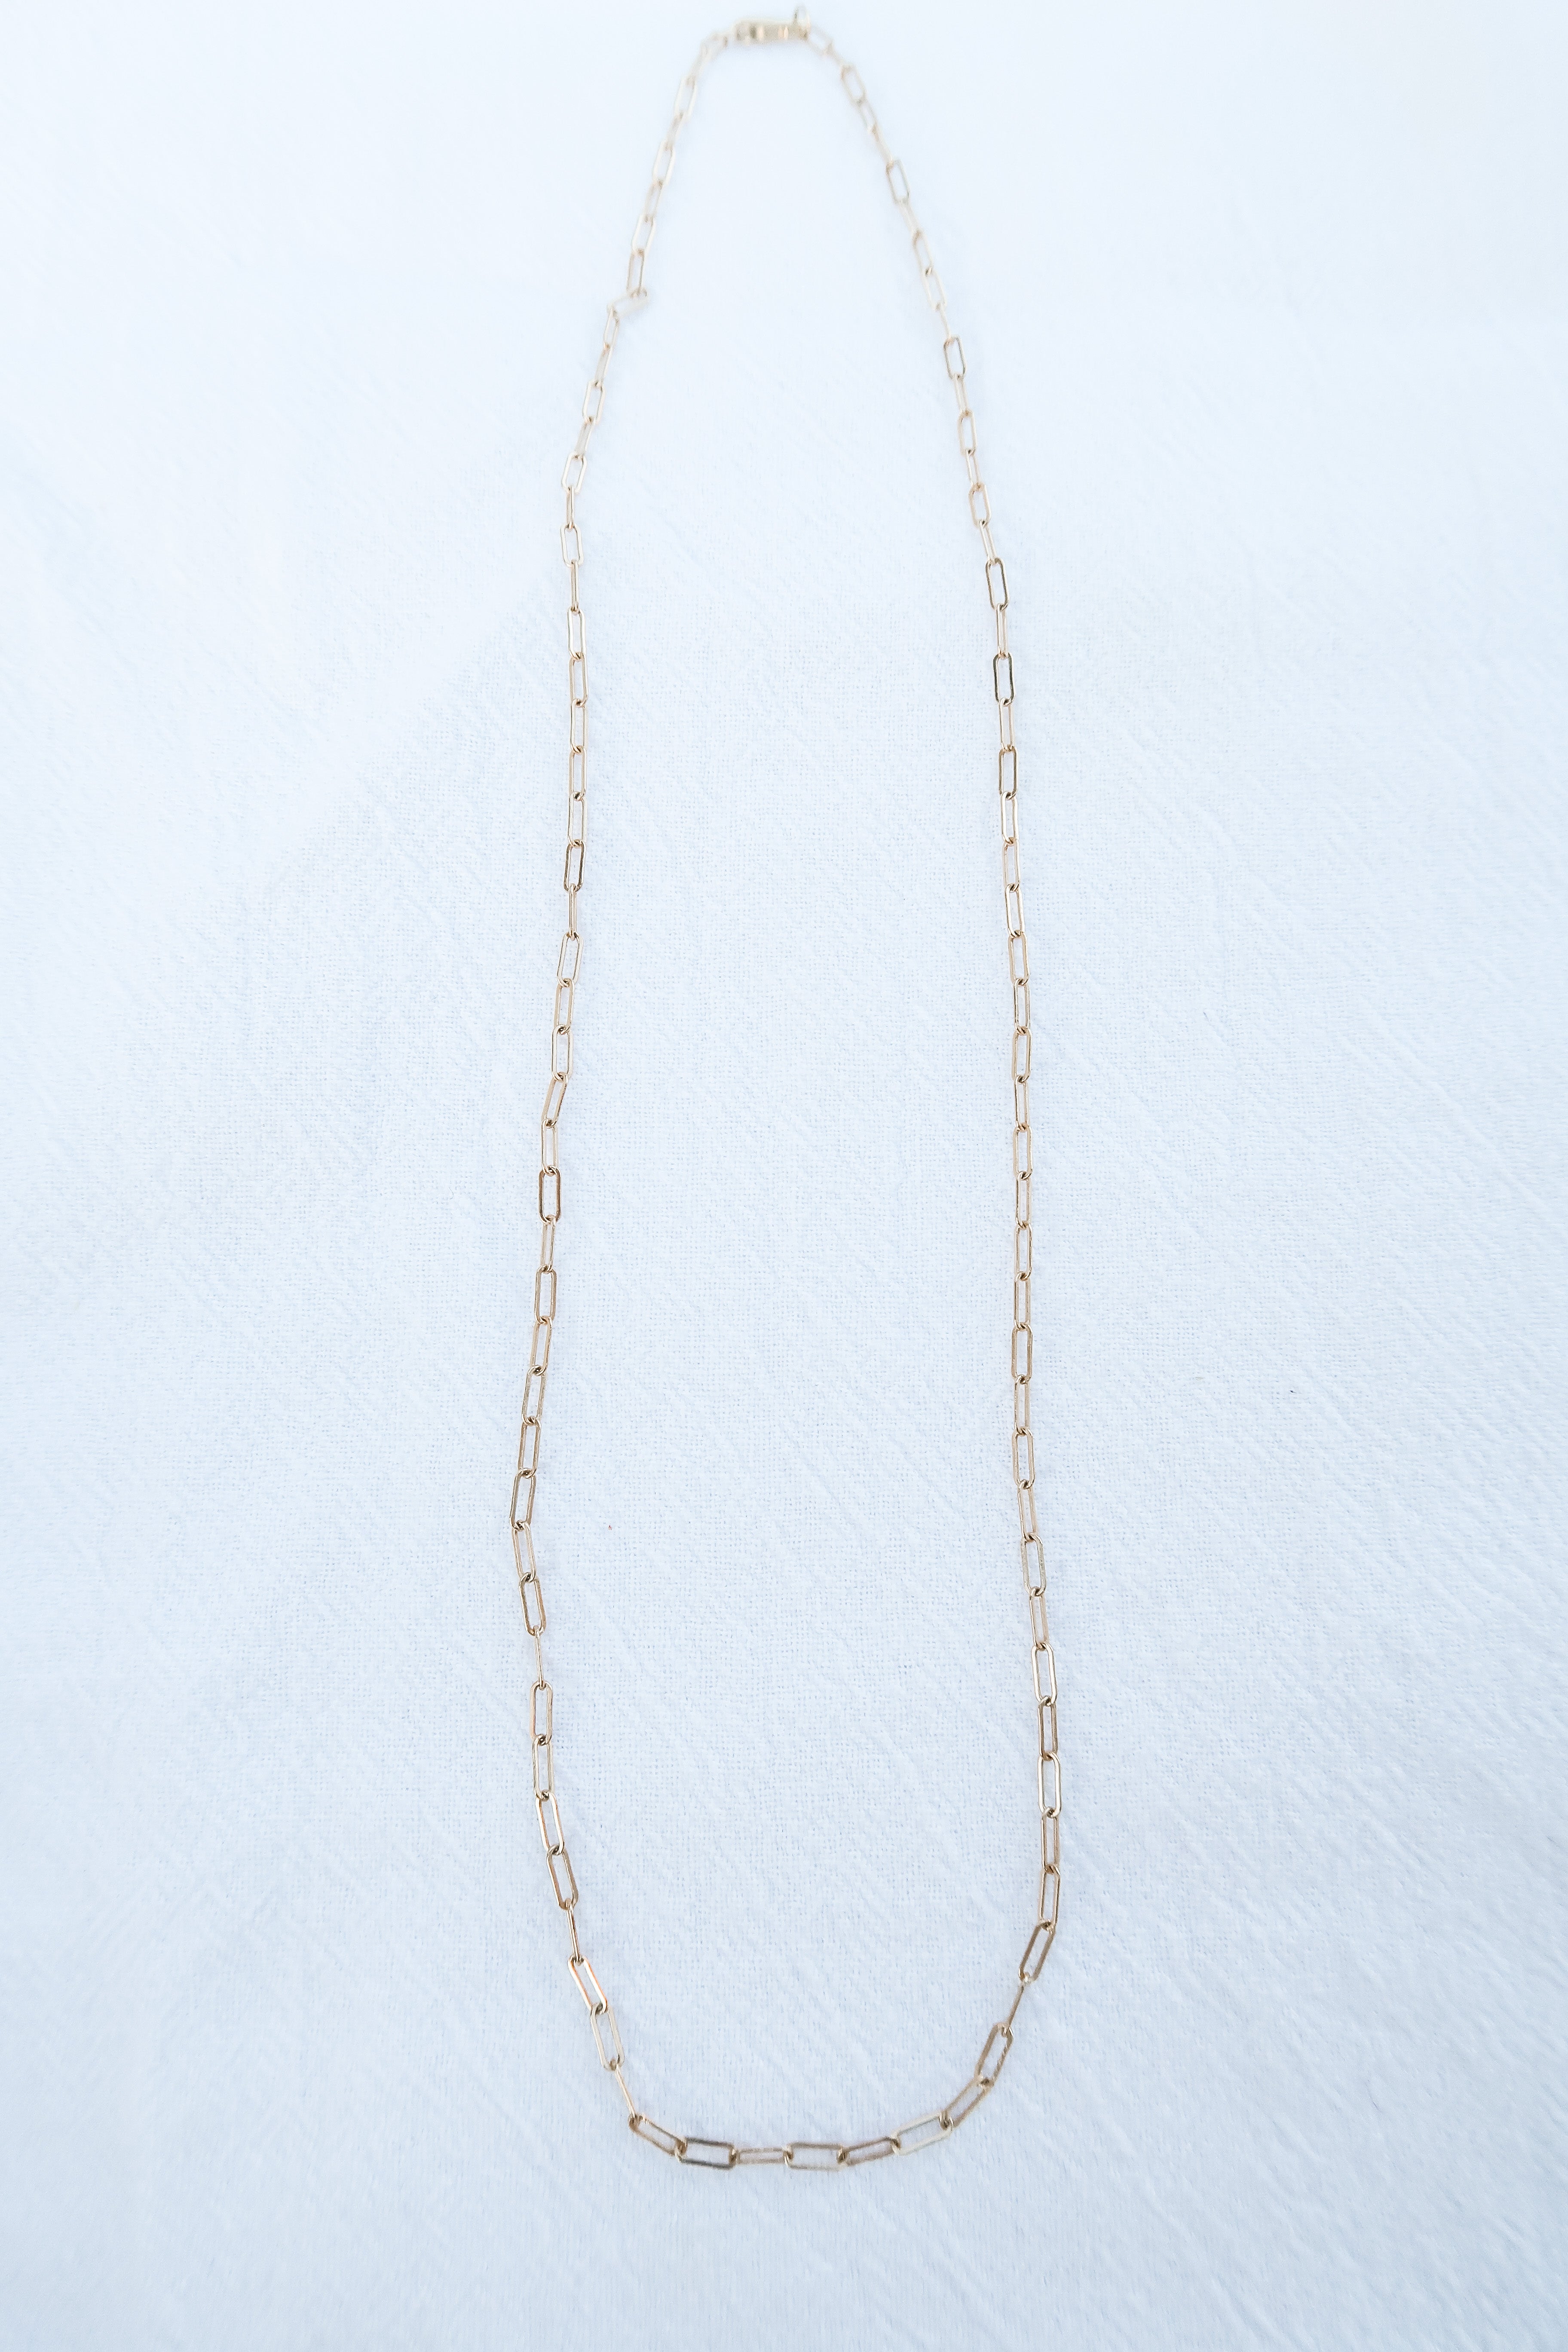 14K Gold Dainty Paperclip Chain